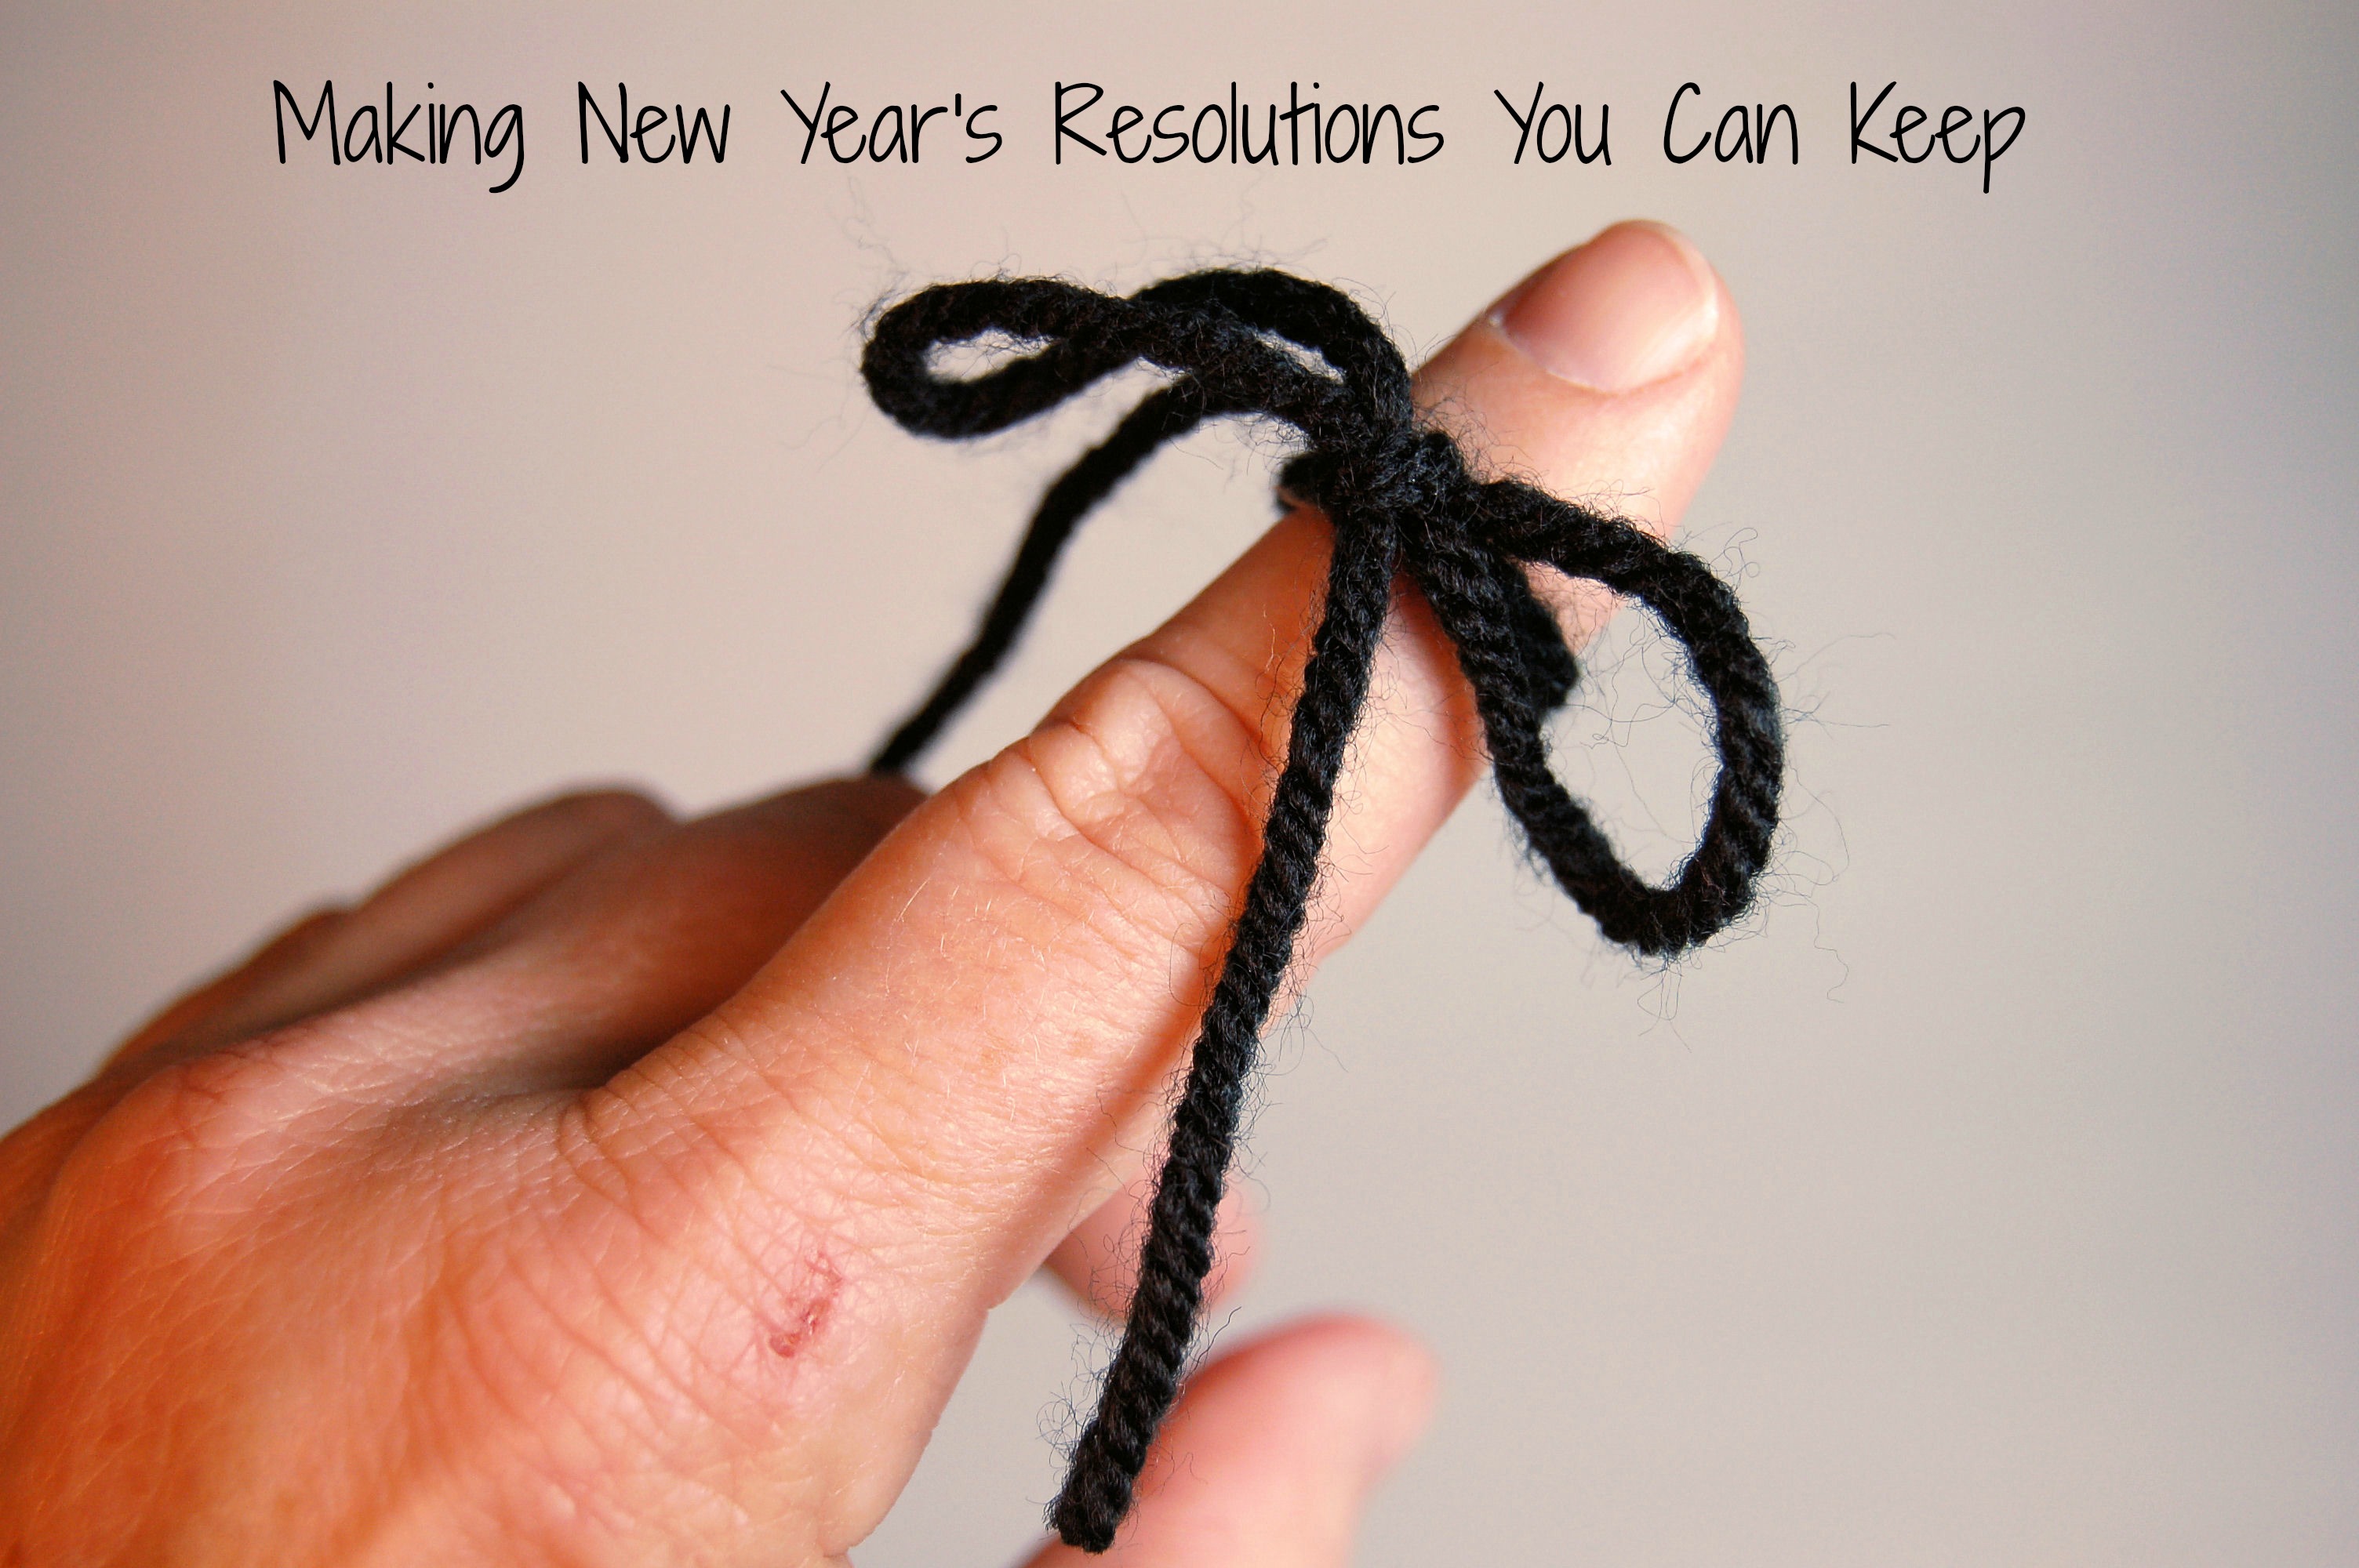 Making New Year’s Resolutions You Can Keep